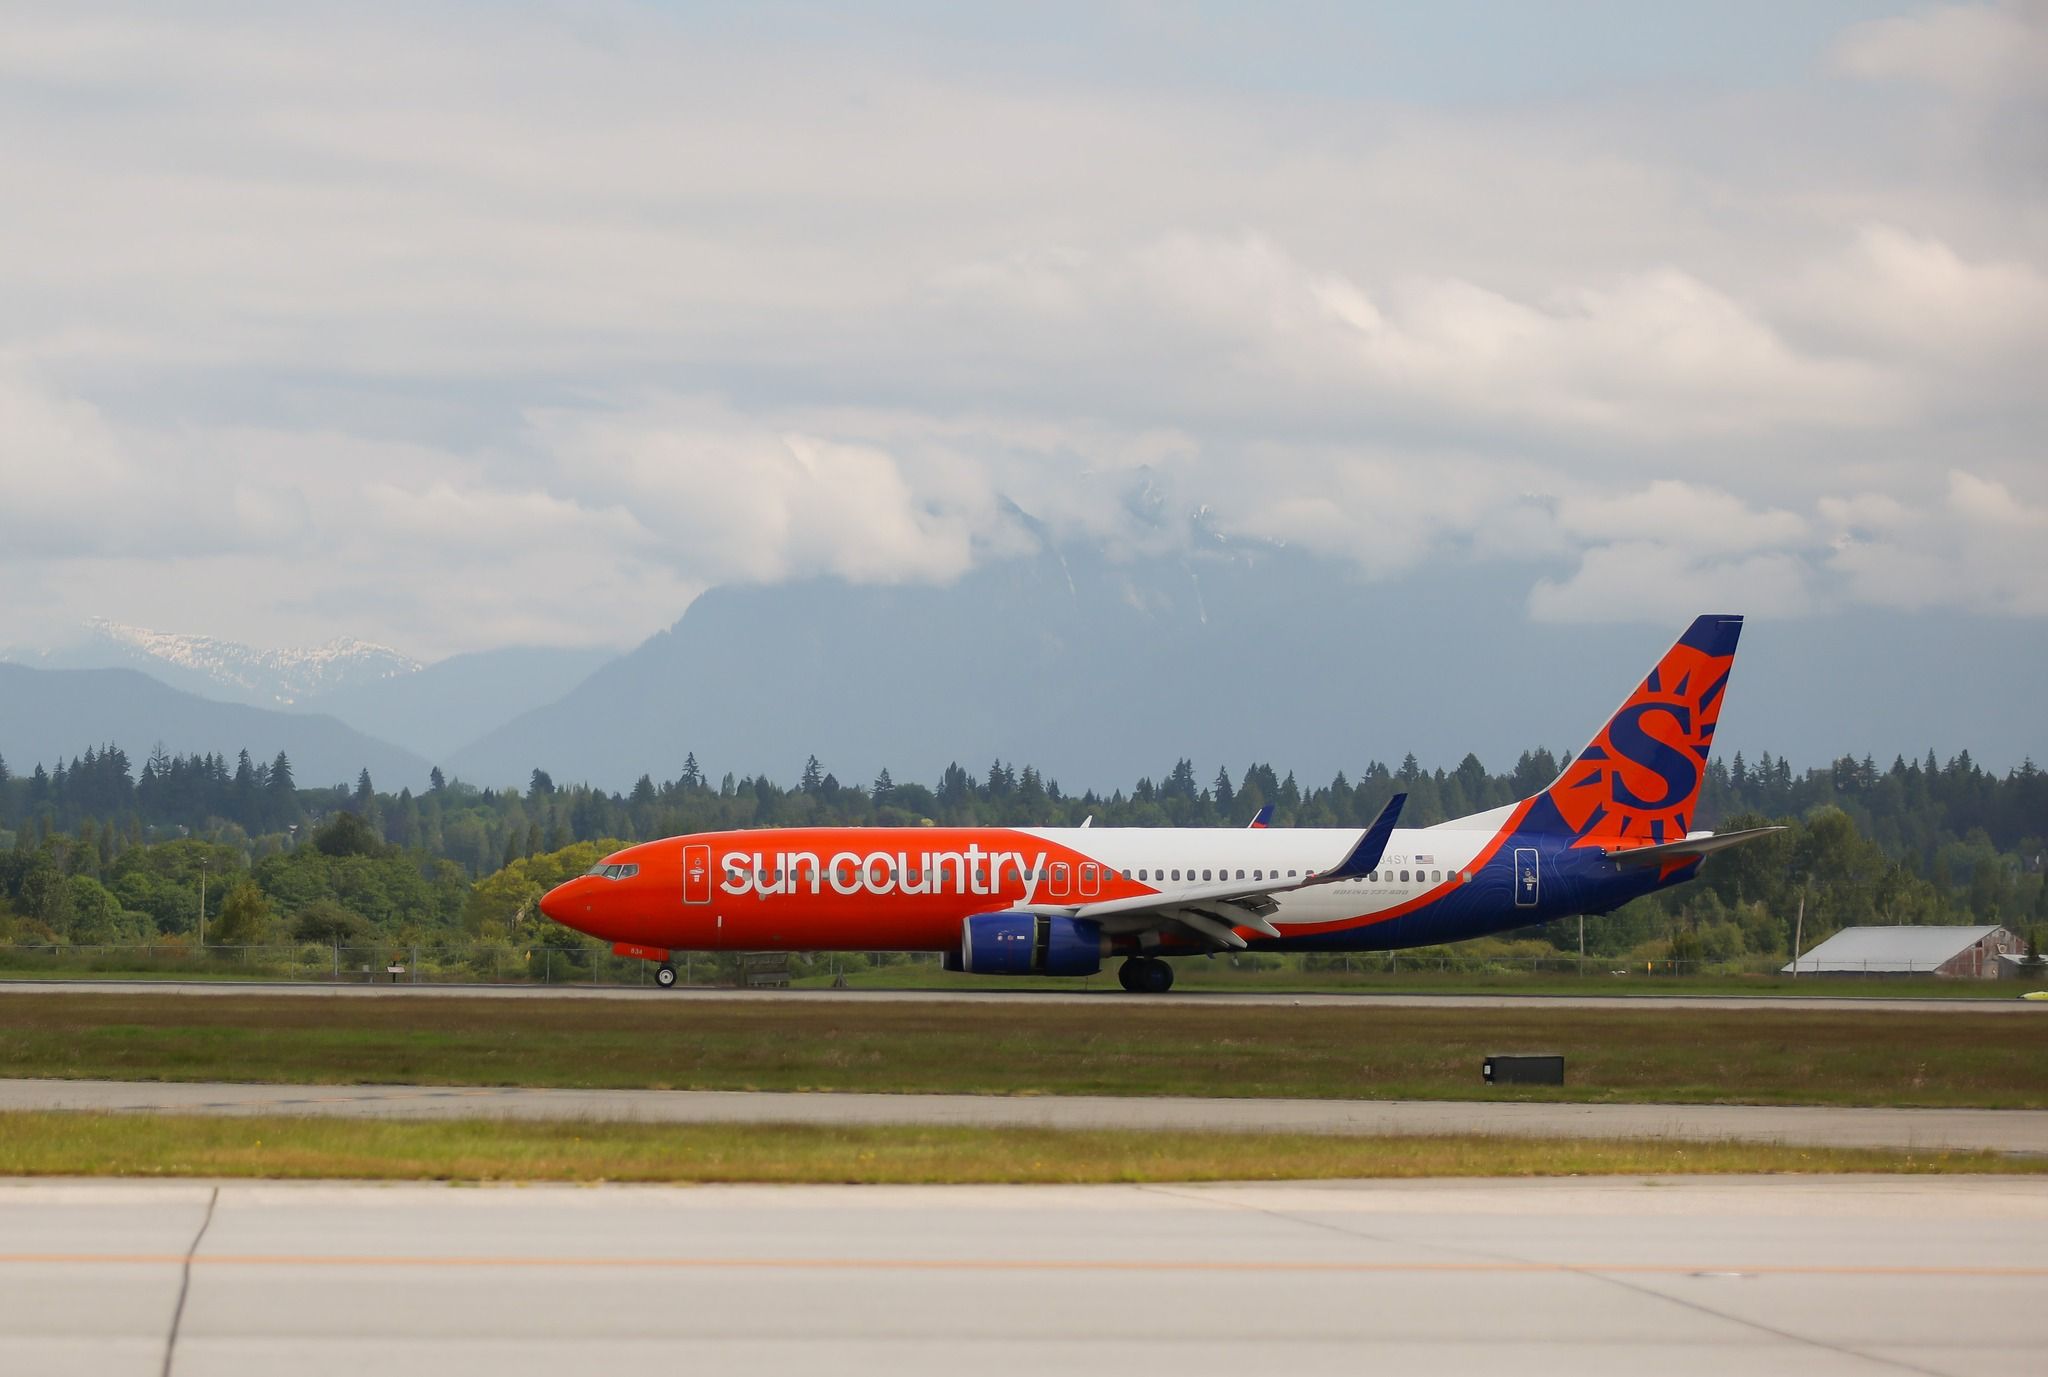 Sun Country Airlines Boeing 737-800 slowing down on the runway.